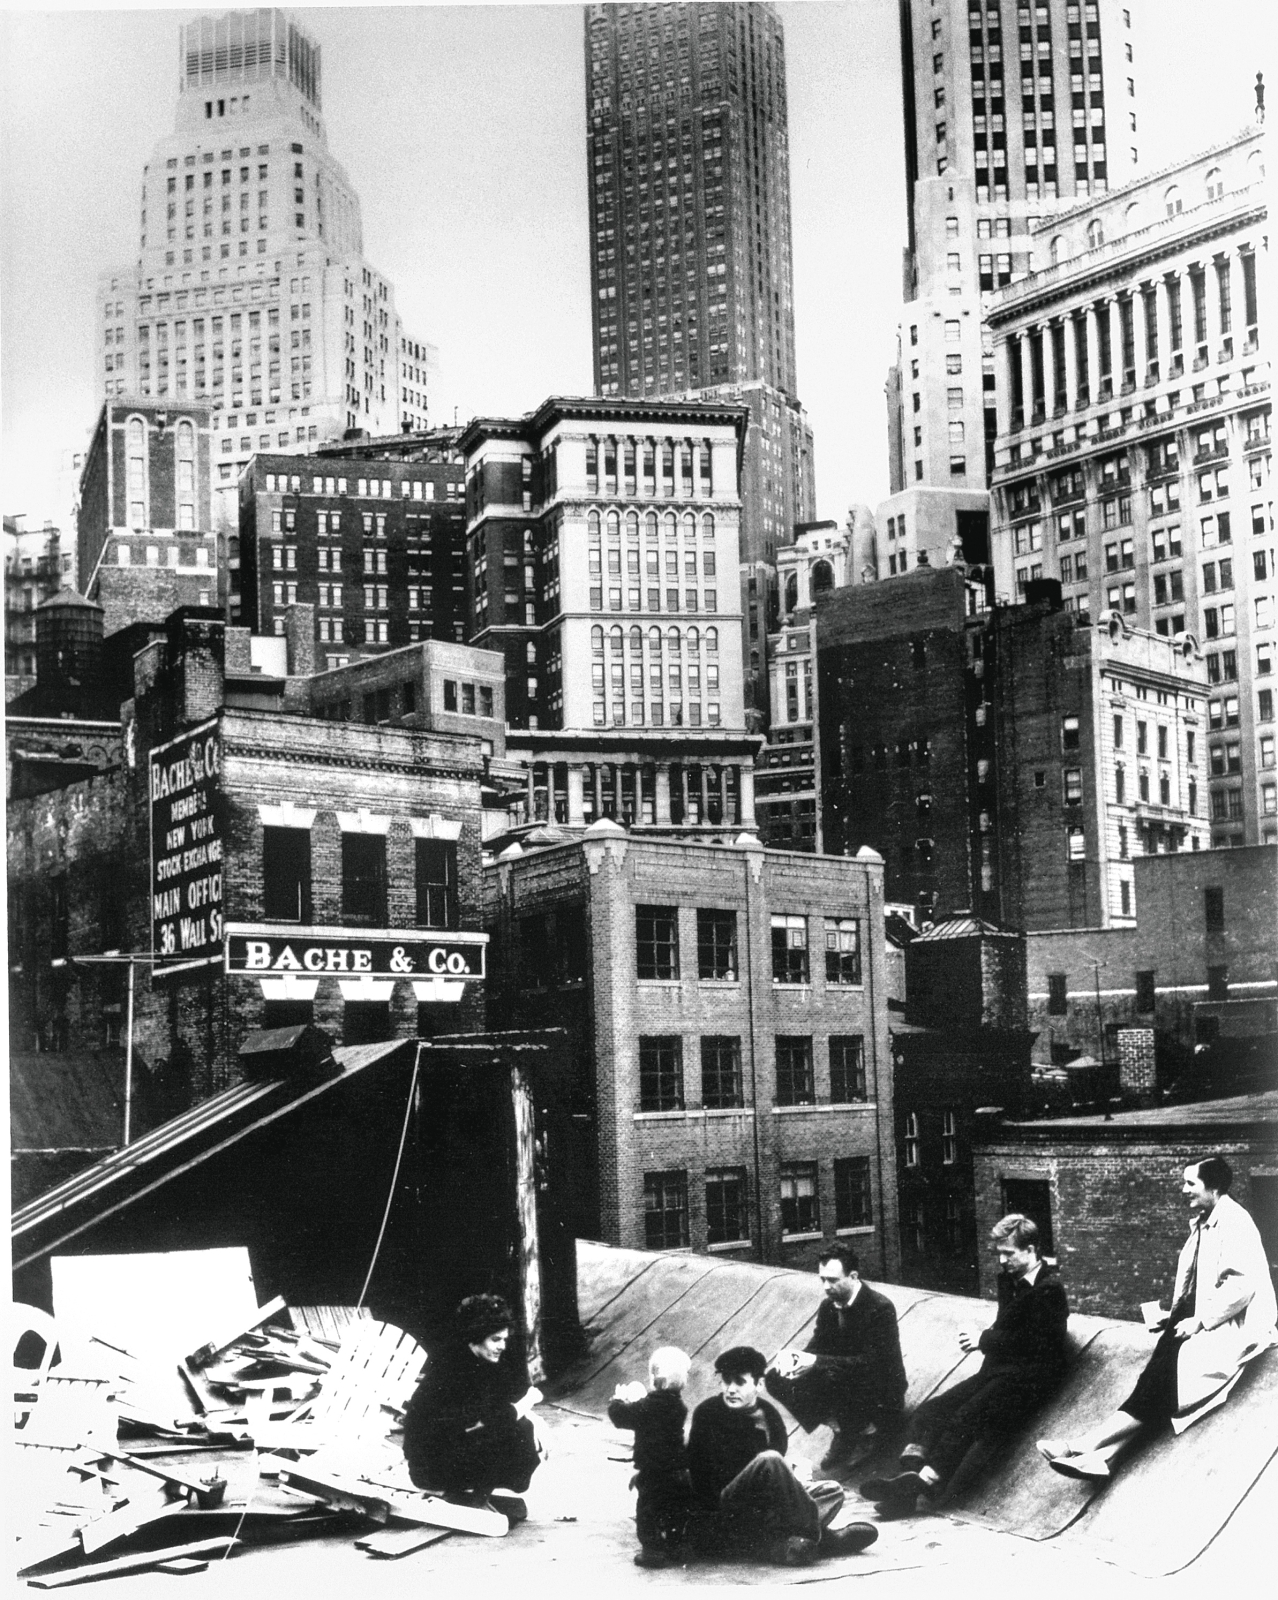 Artists on the roof of 3-5 Coenties Slip (left to right: Delphine Seyrig, Duncan Youngerman, Robert Clark, Ellsworth Kelly, Jack Youngerman and Agnes Martin), 1958. Photo: Hans Namuth/Posthumous digital reproduction from original negative/ Hans Namuth Archive, Center for Creative Photography&nbsp;&copy; 1991 Hans Namuth Estate